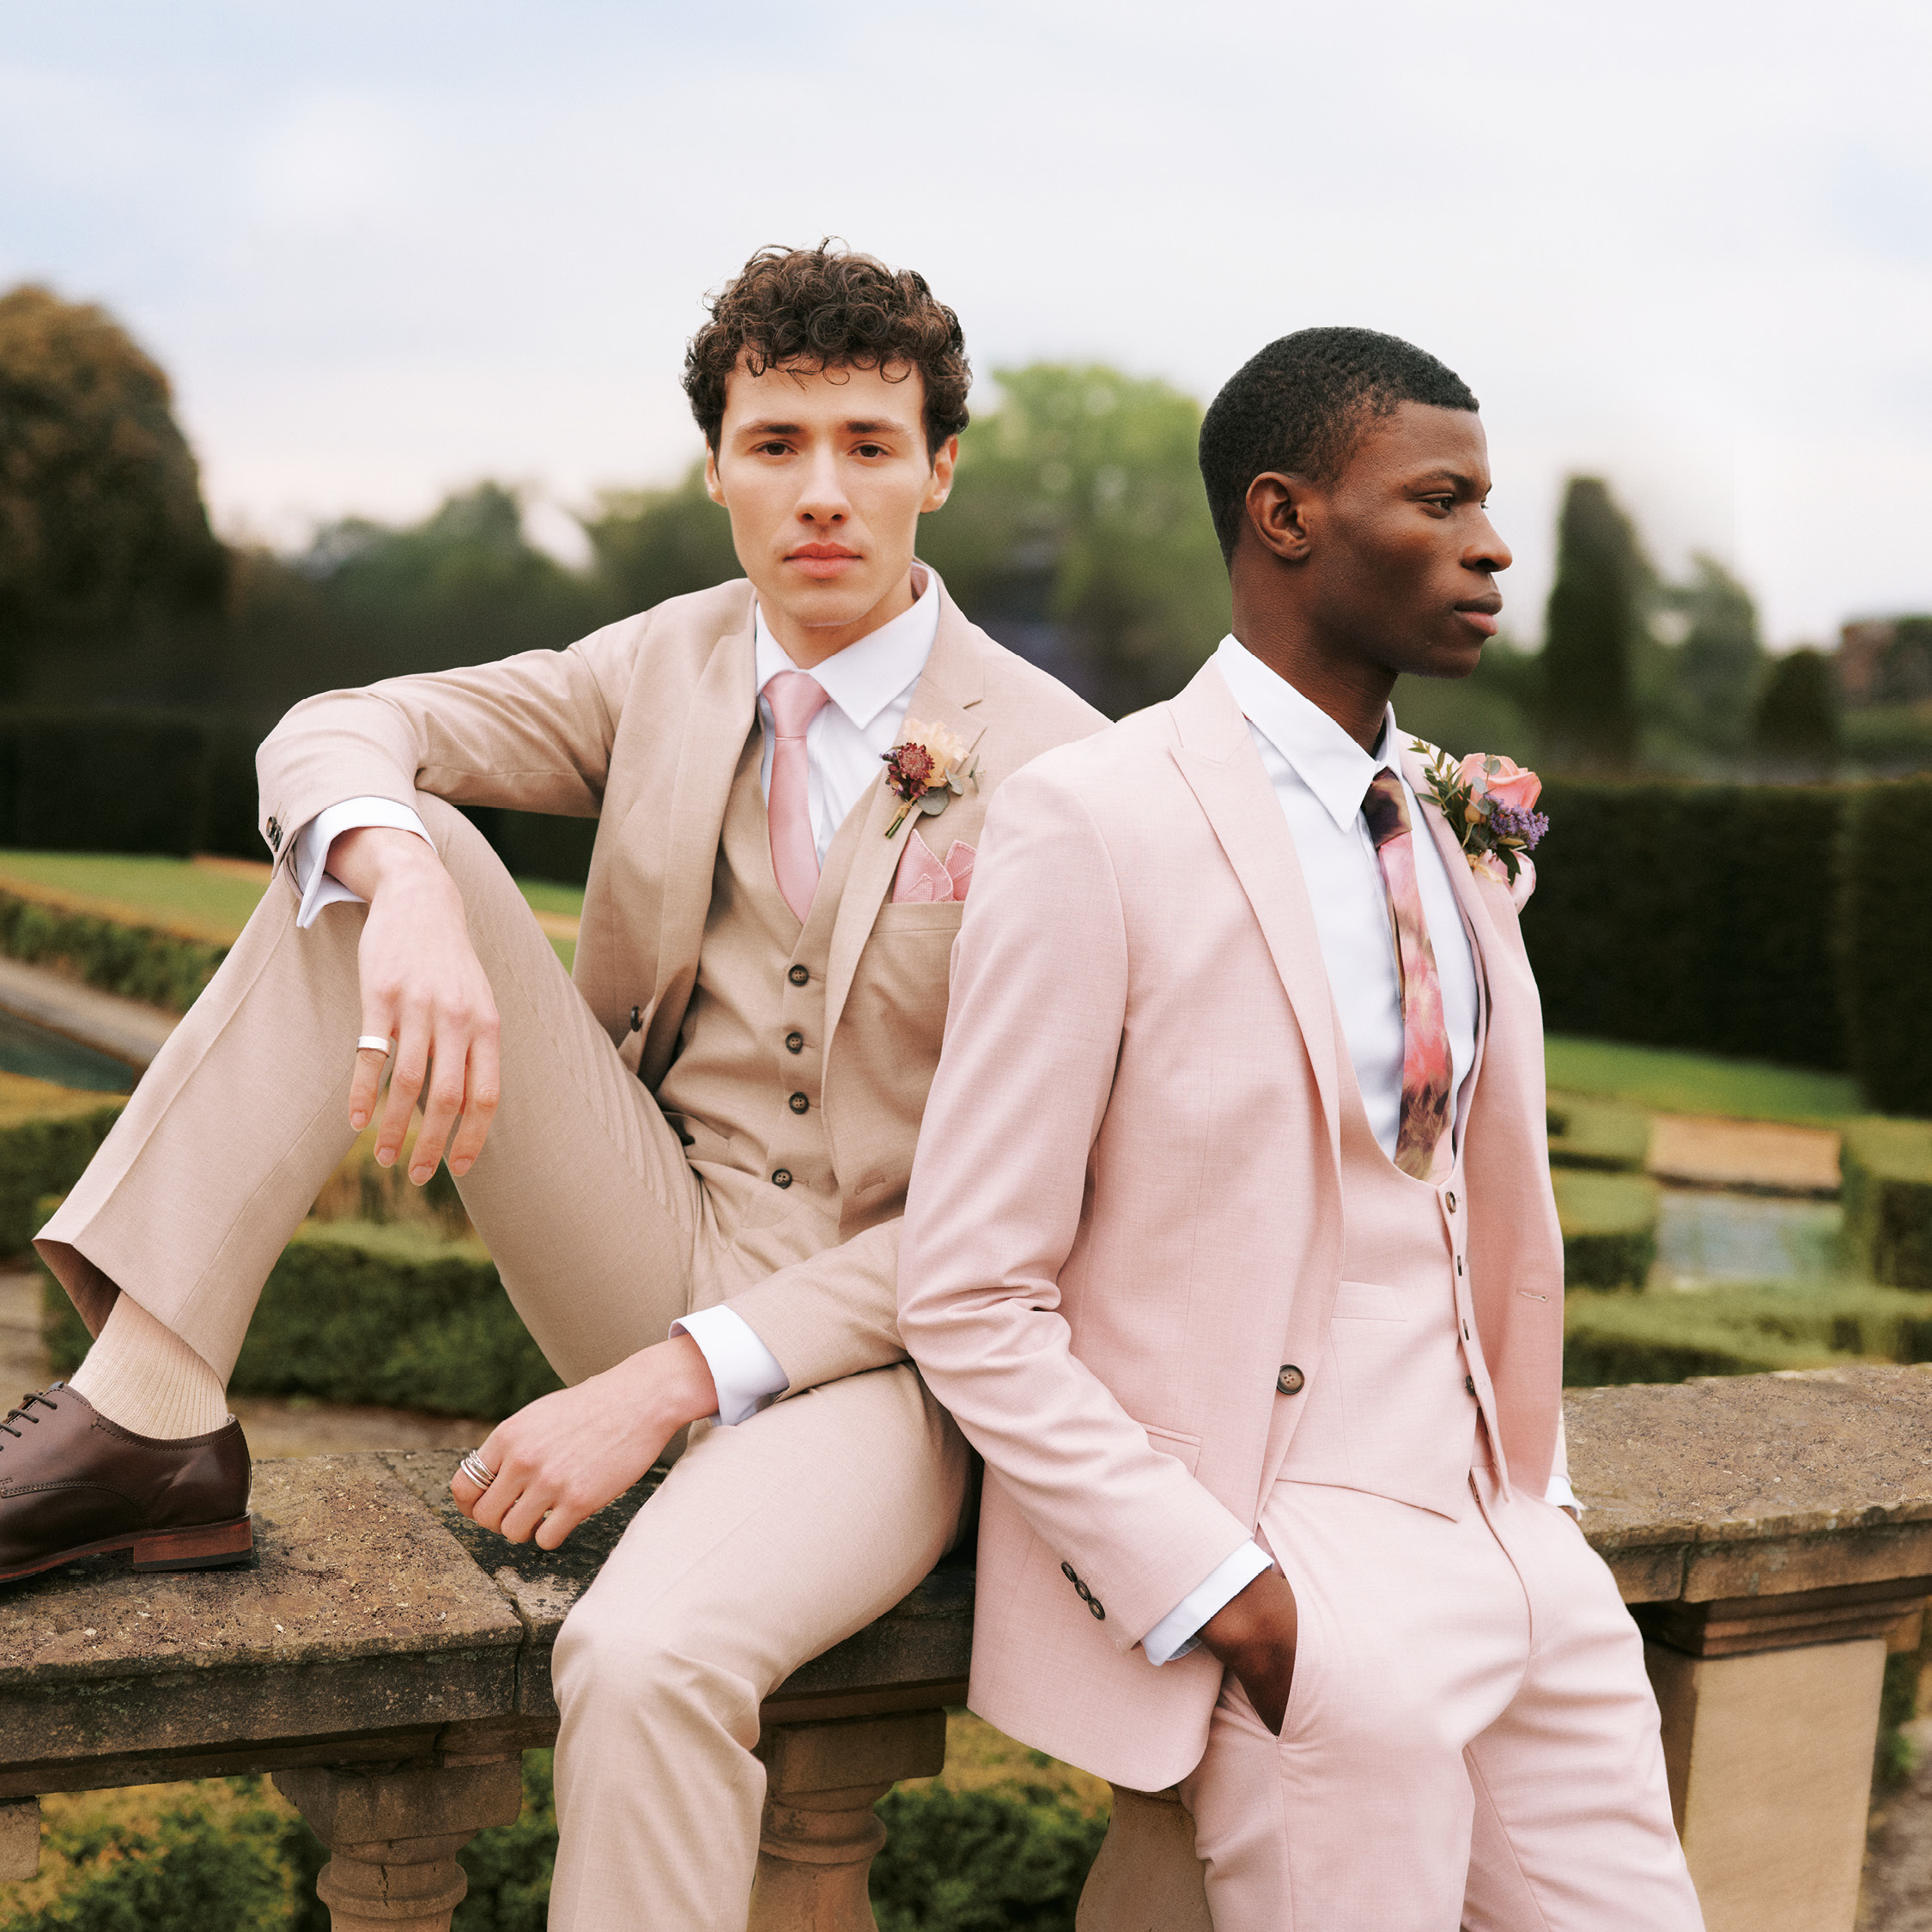 Groom goes free! See in store for details. T&Cs apply. 